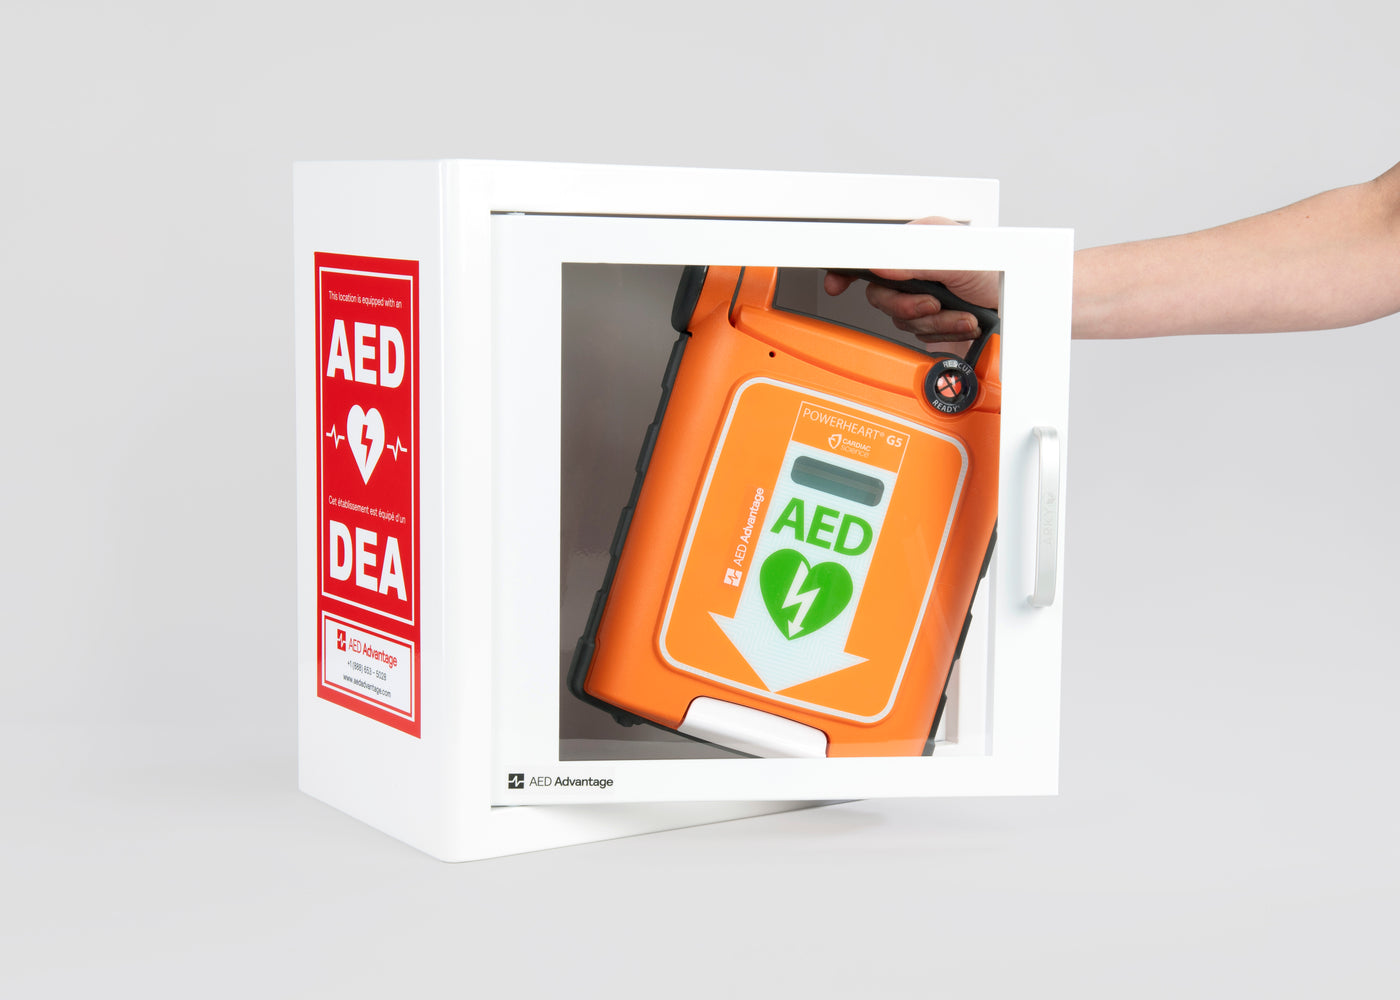 An orange Powerheart G5 AED being retrieved by hand from a white metal cabinet with red decals